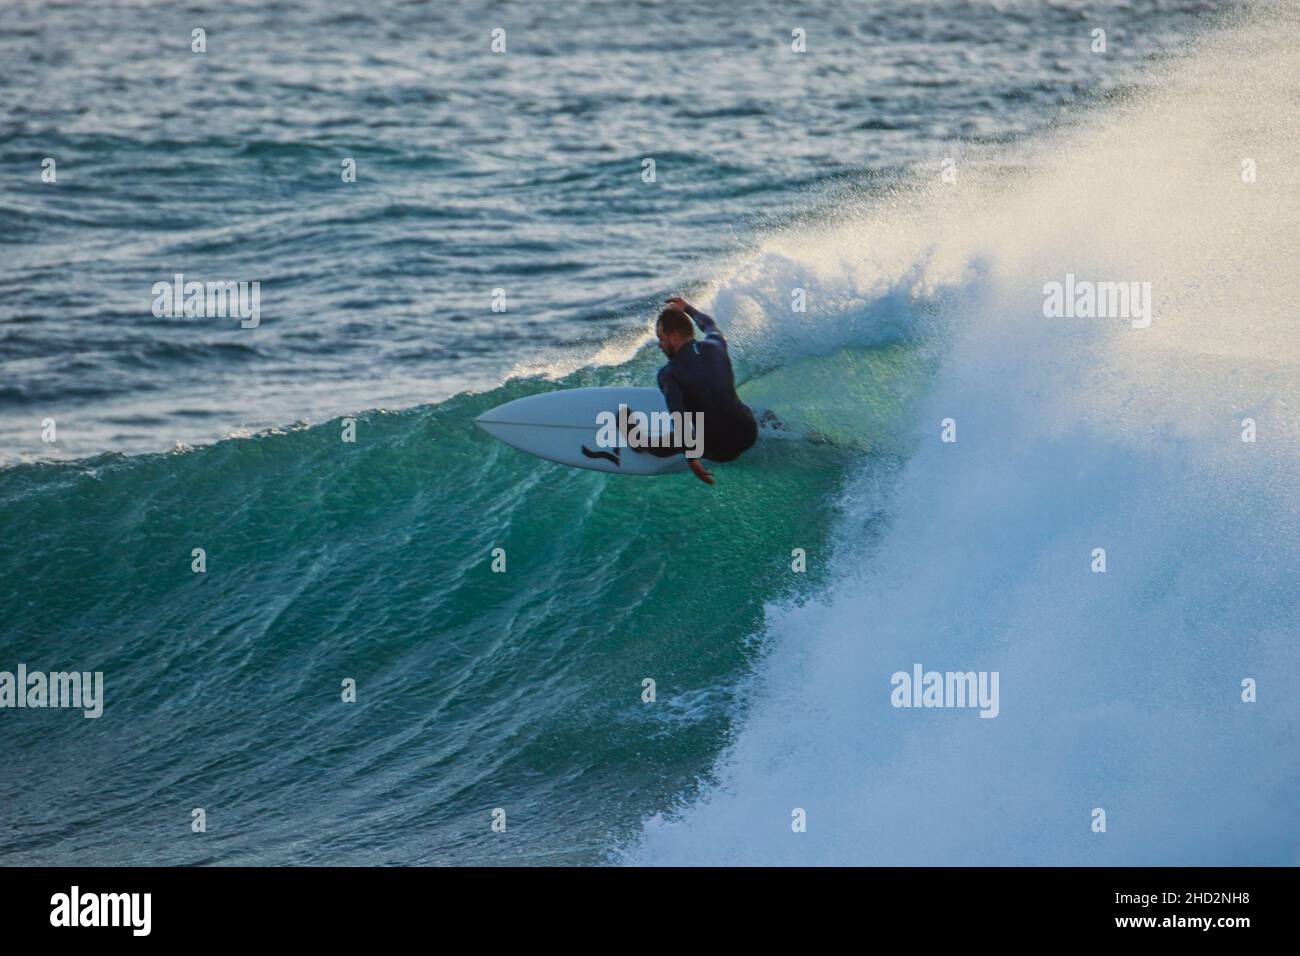 Surfer in a perfect barrel wave. Stock Photo